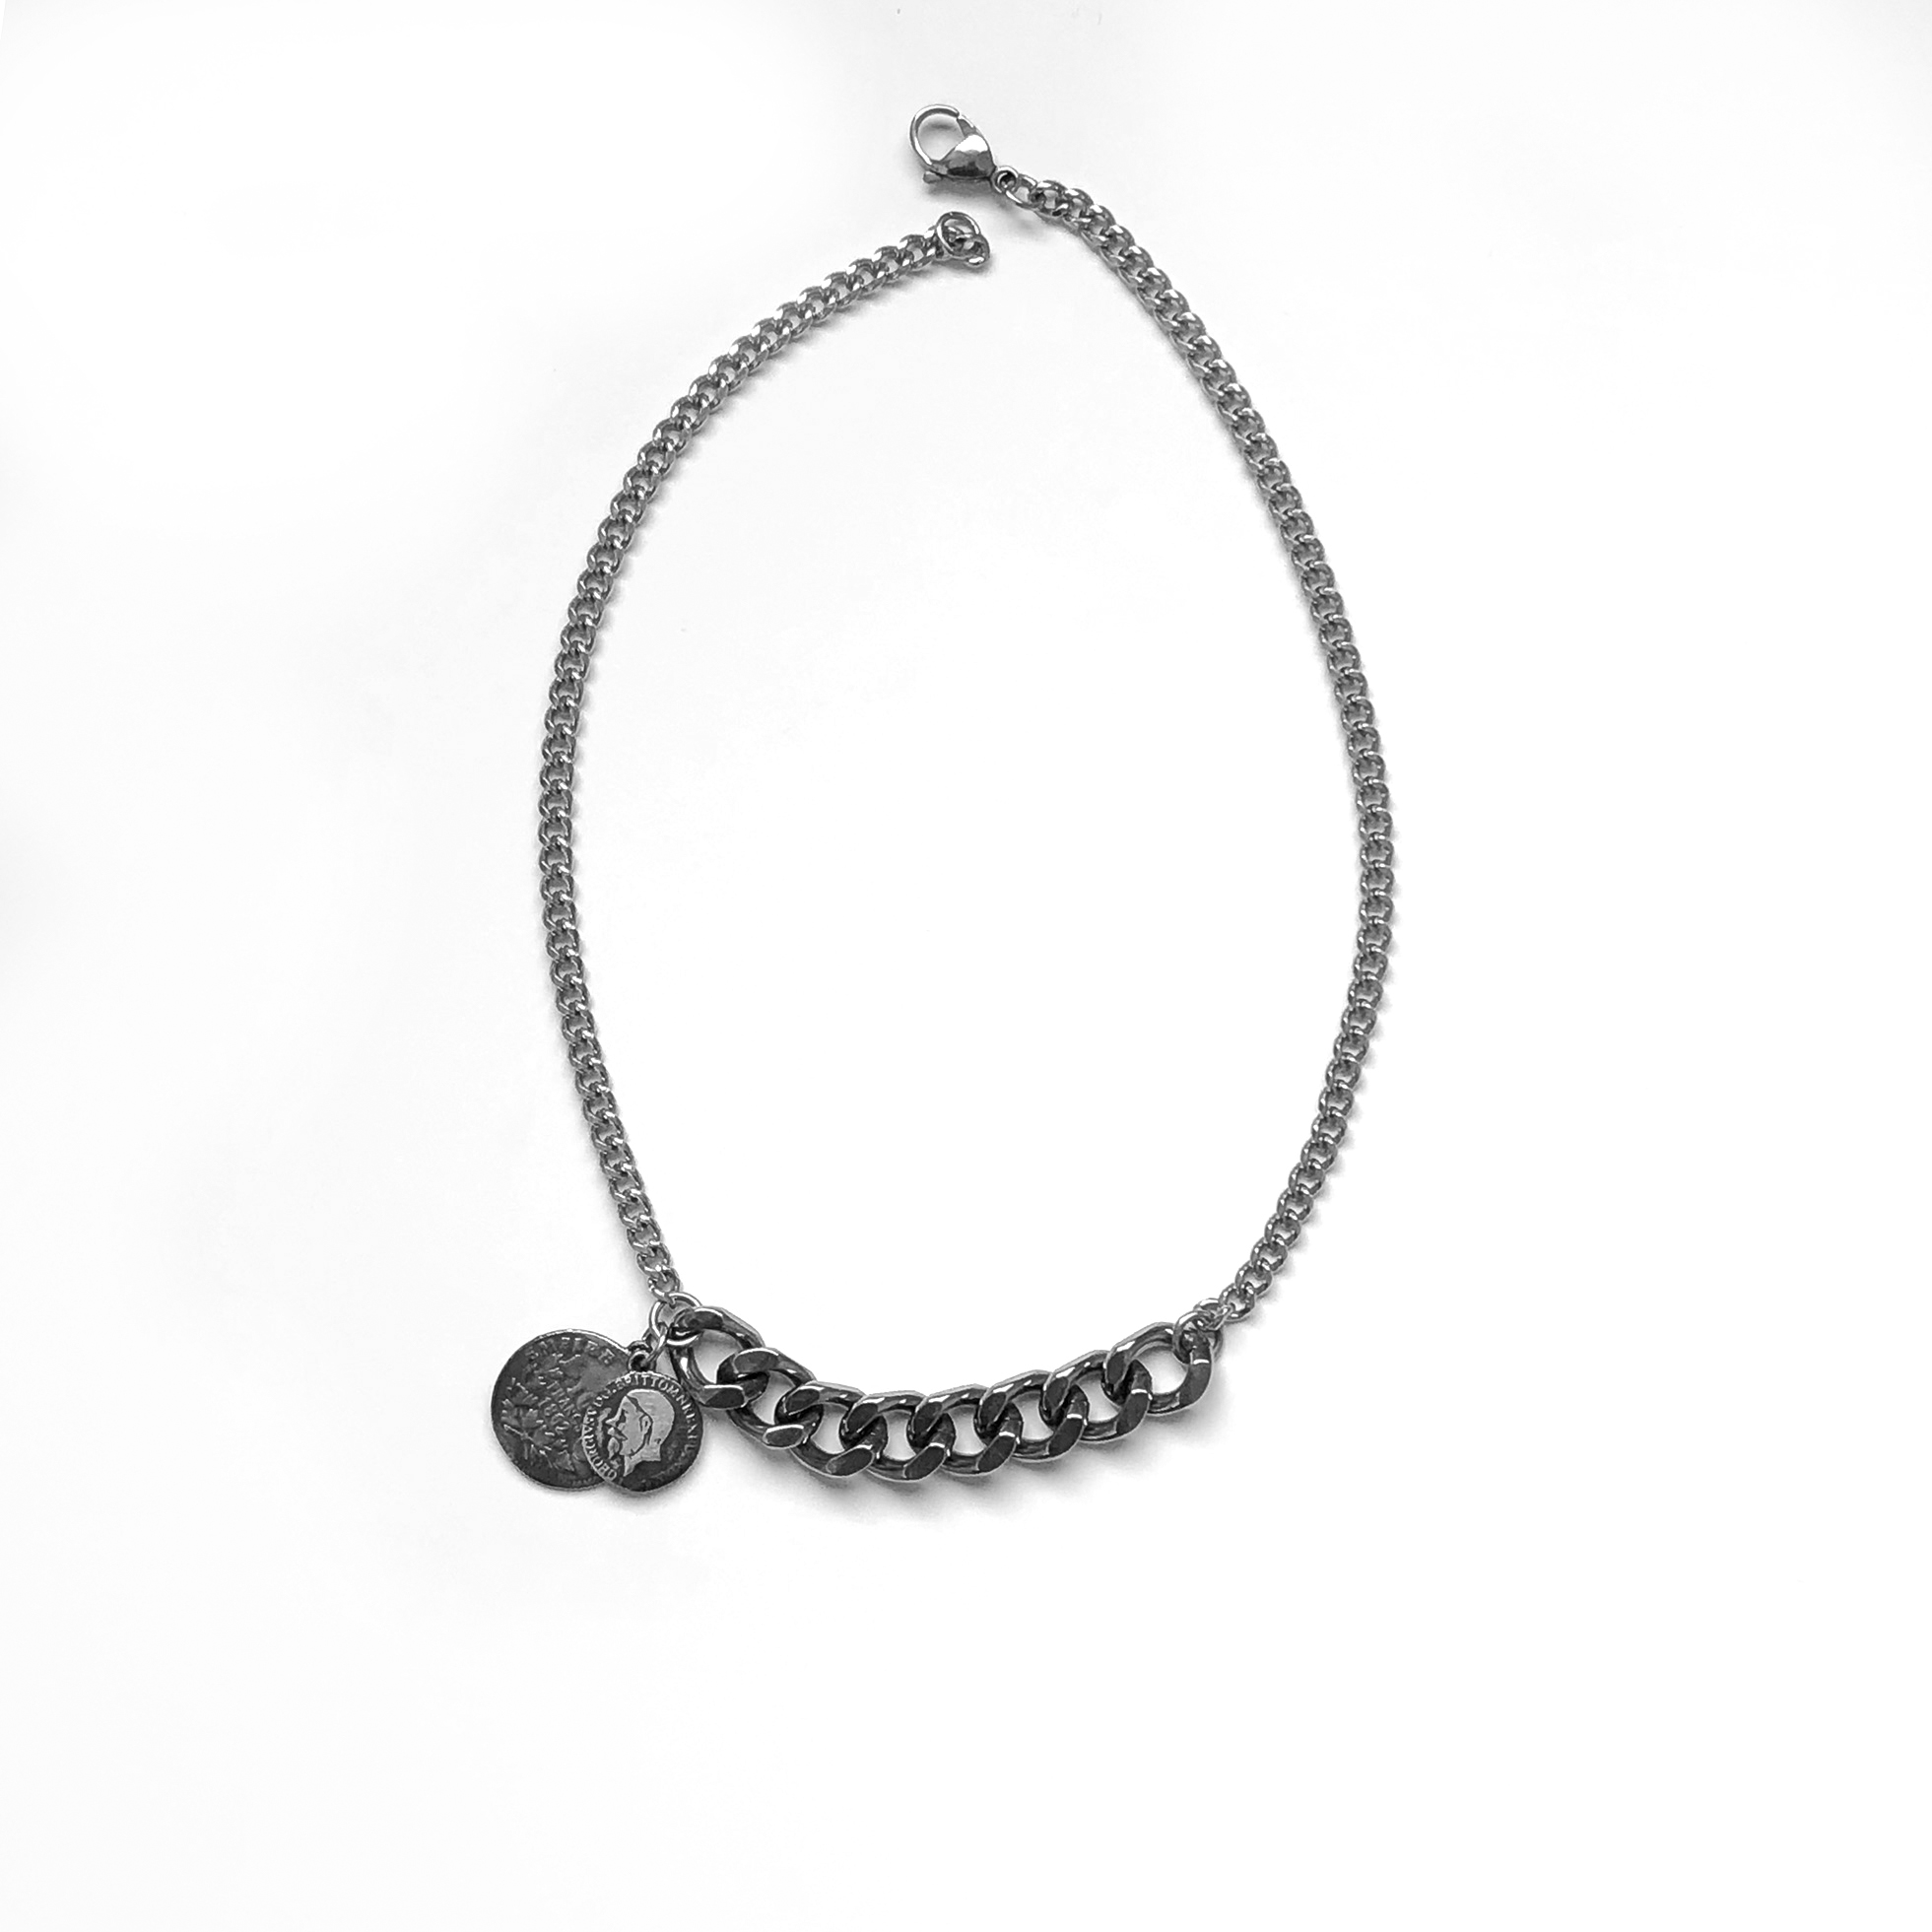 Nilu Gunmetal Silver Big Chain Necklace with 2 Coins